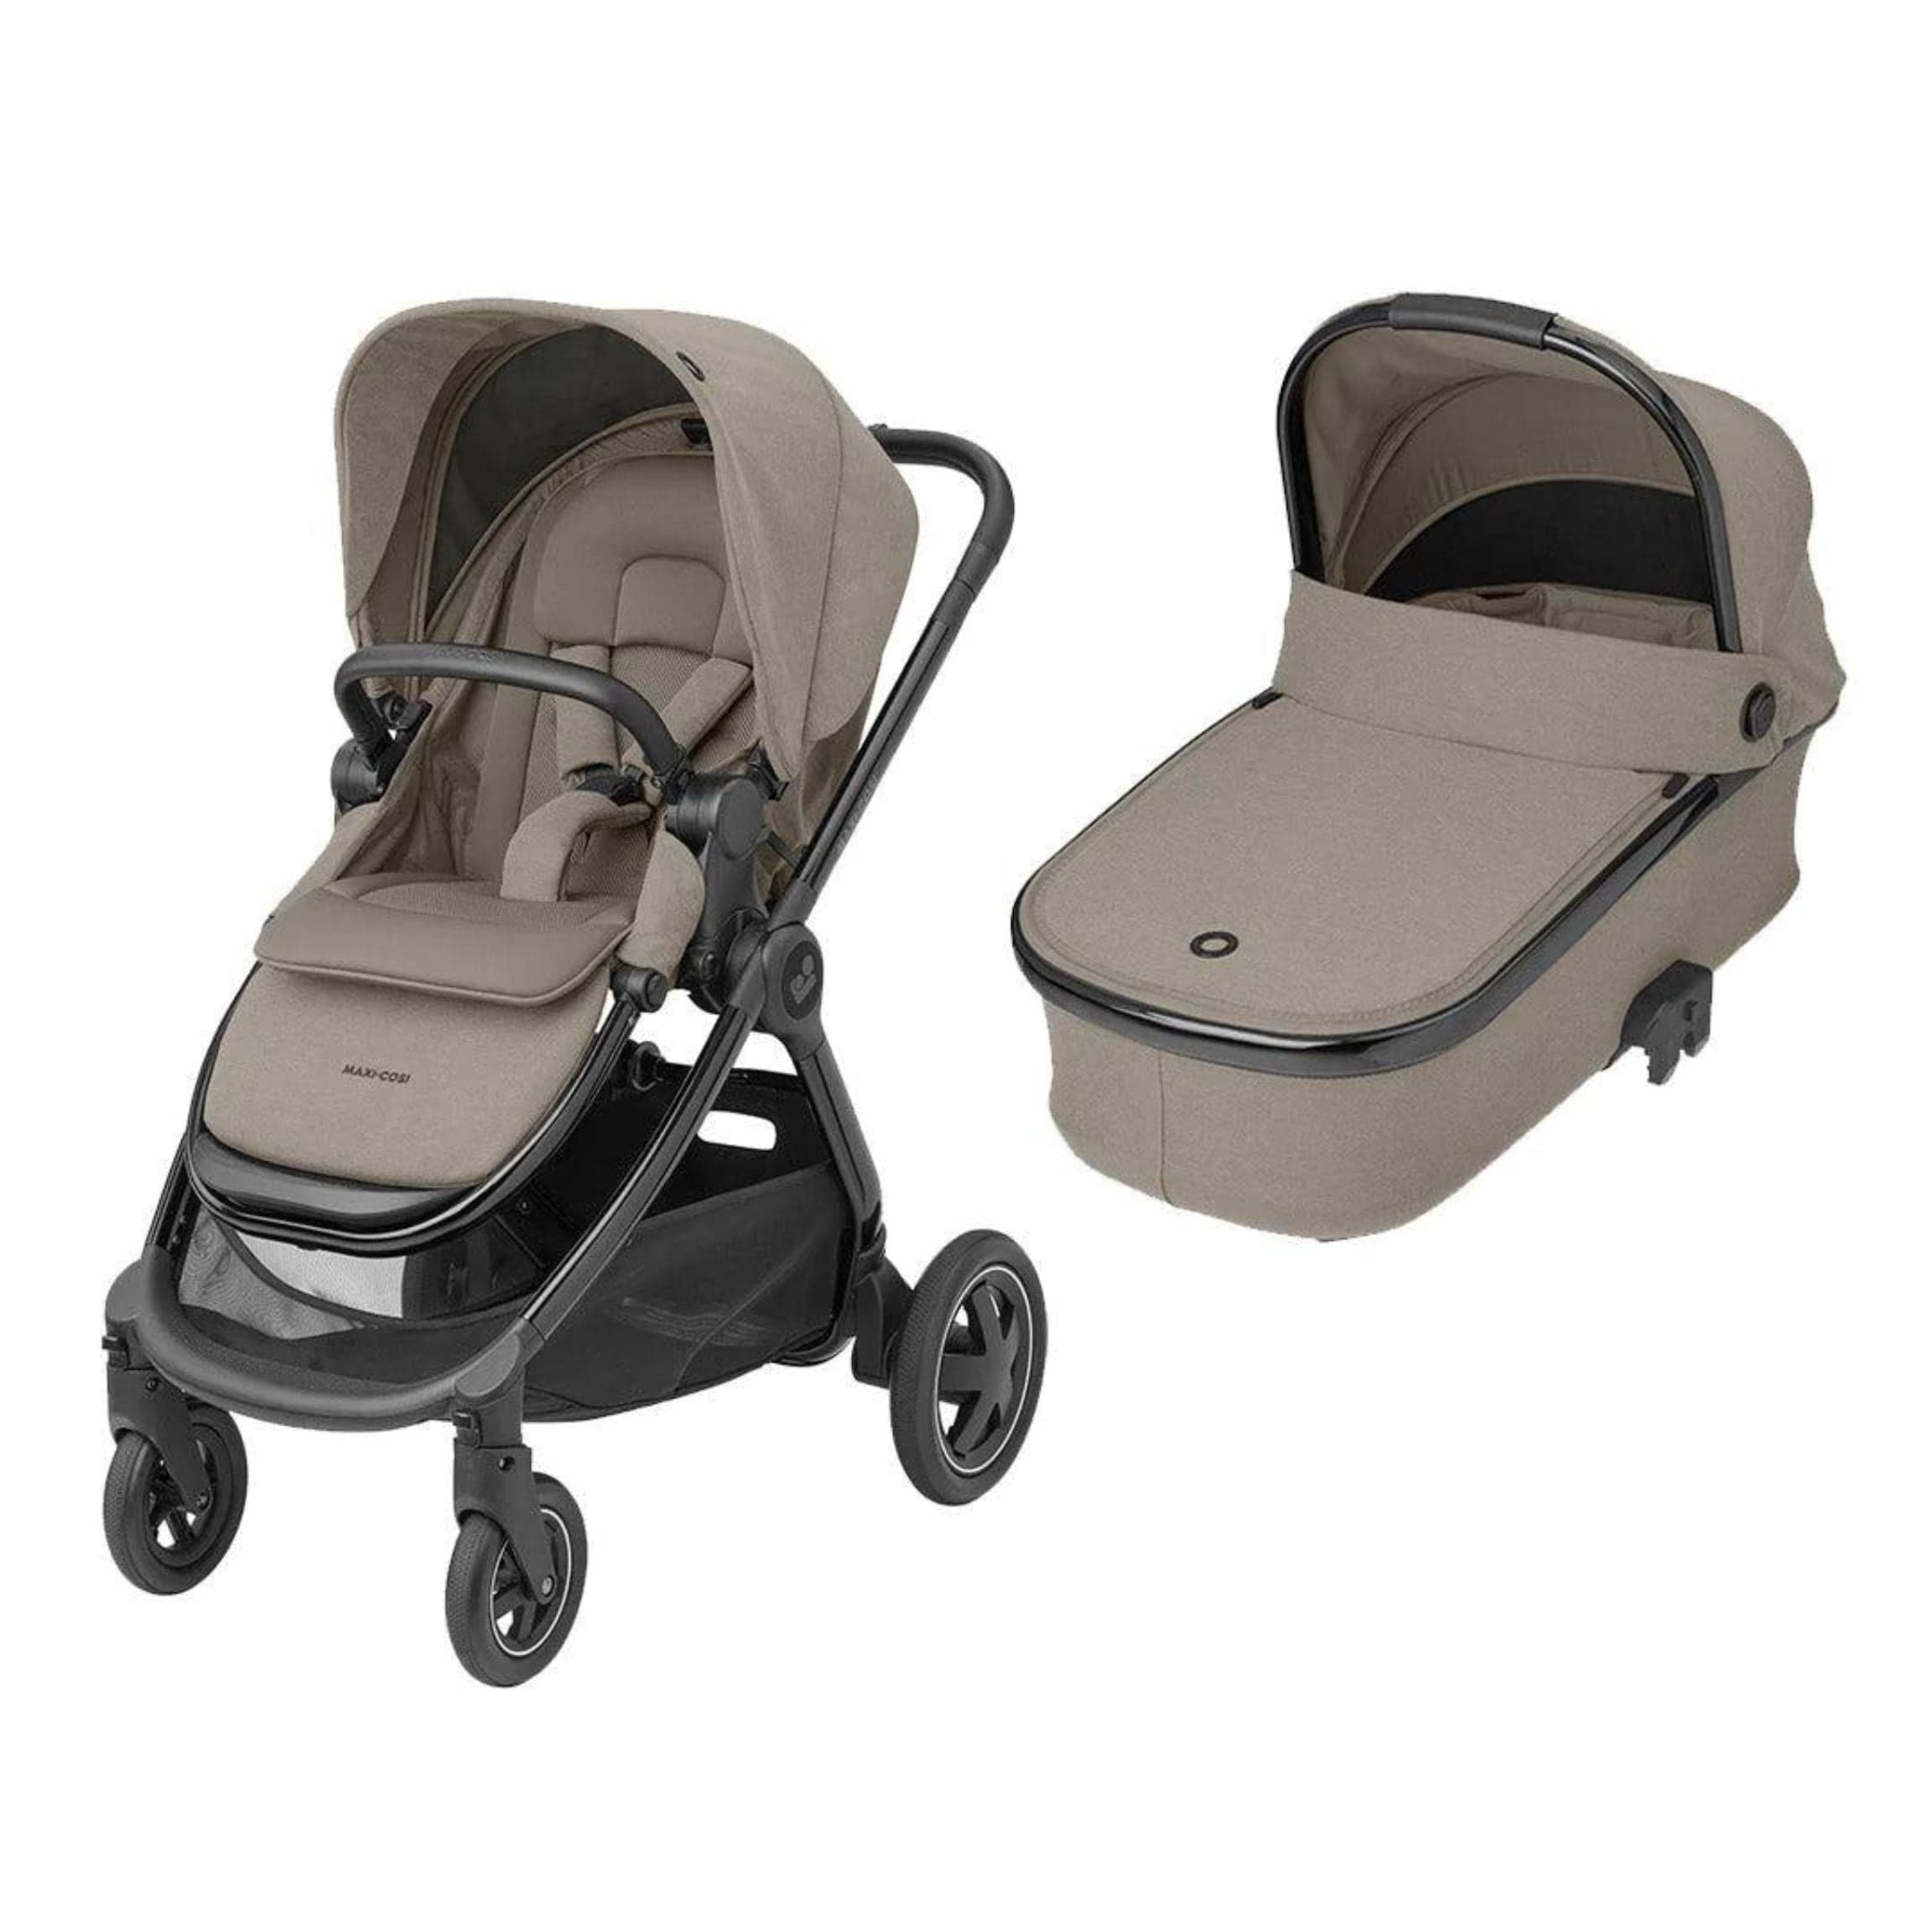 Maxi-Cosi Adorra Luxe Pebble 360 Travel System & Base in Twillic Truffle Travel Systems KF51800000 3220660337989